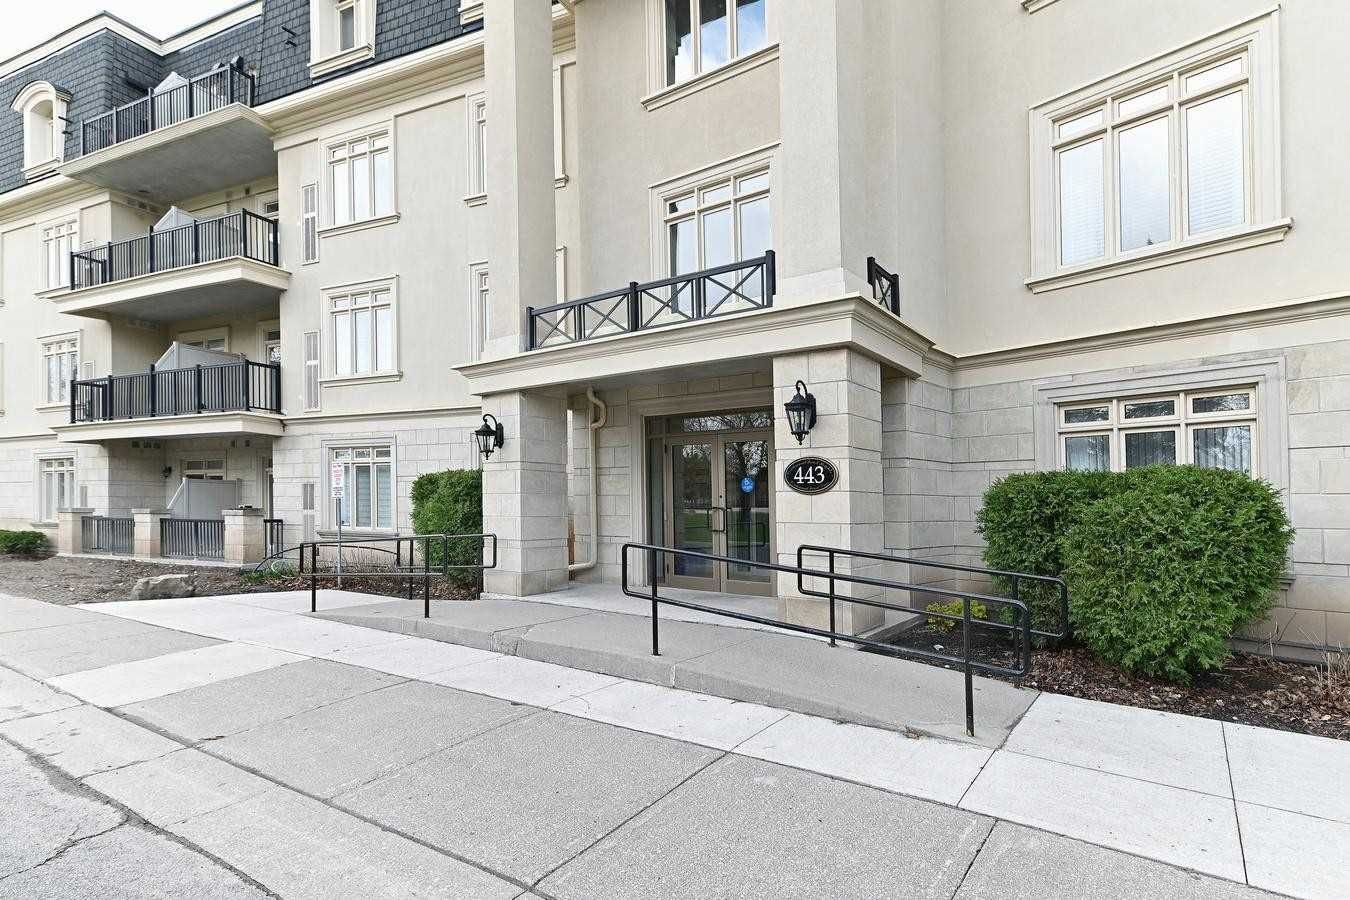 443 Centennial Forest Drive. Centennial Forest Heights Condos is located in  Milton, Toronto - image #2 of 2